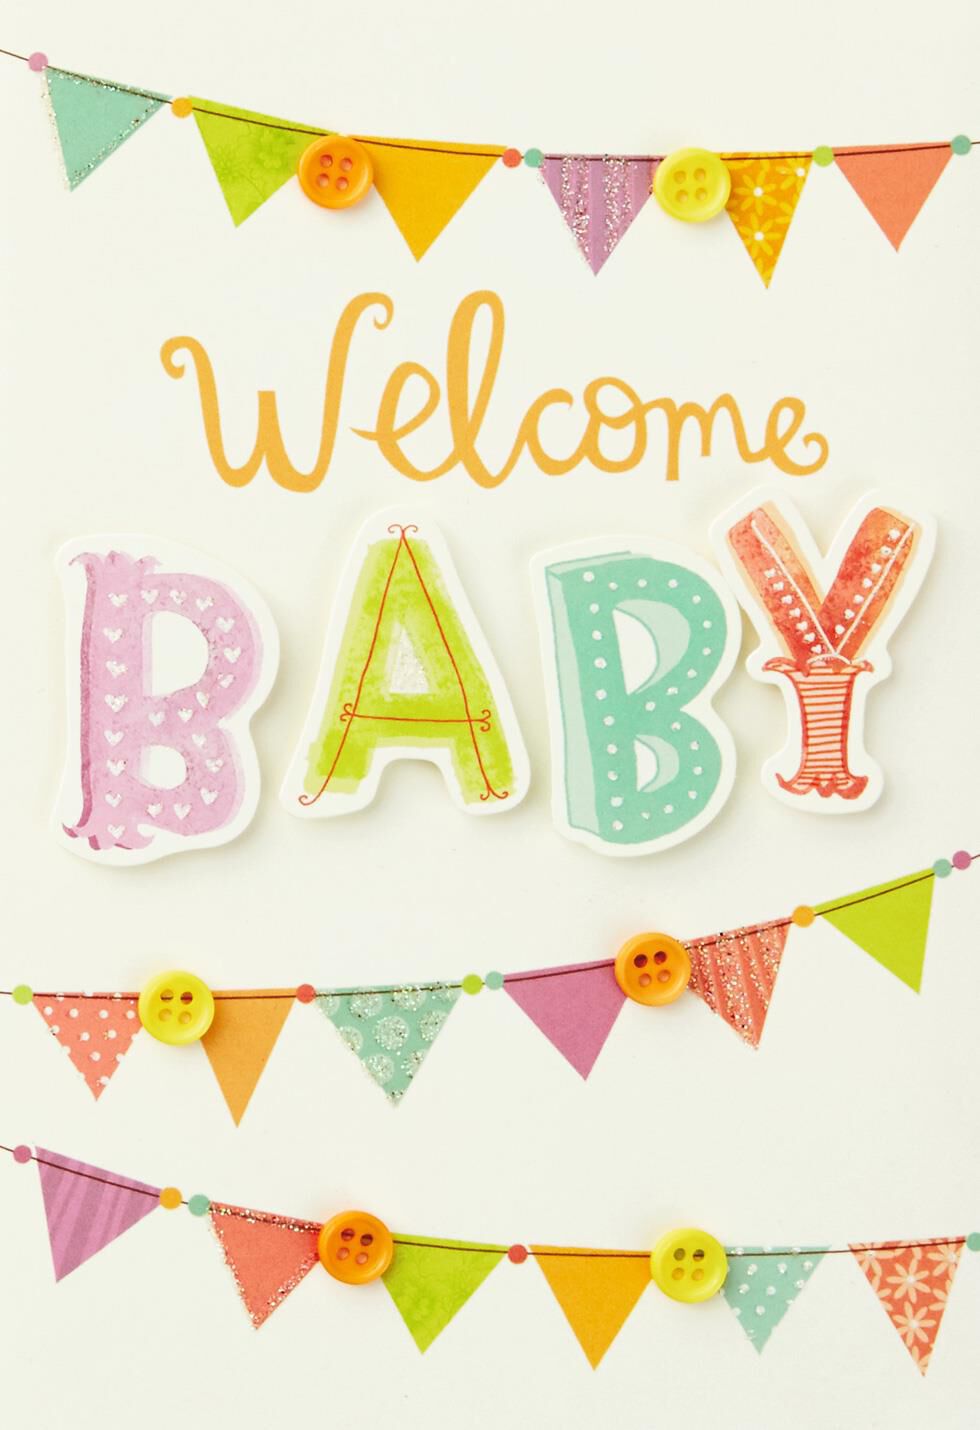 welcome-baby-card-01-png-2550-3300